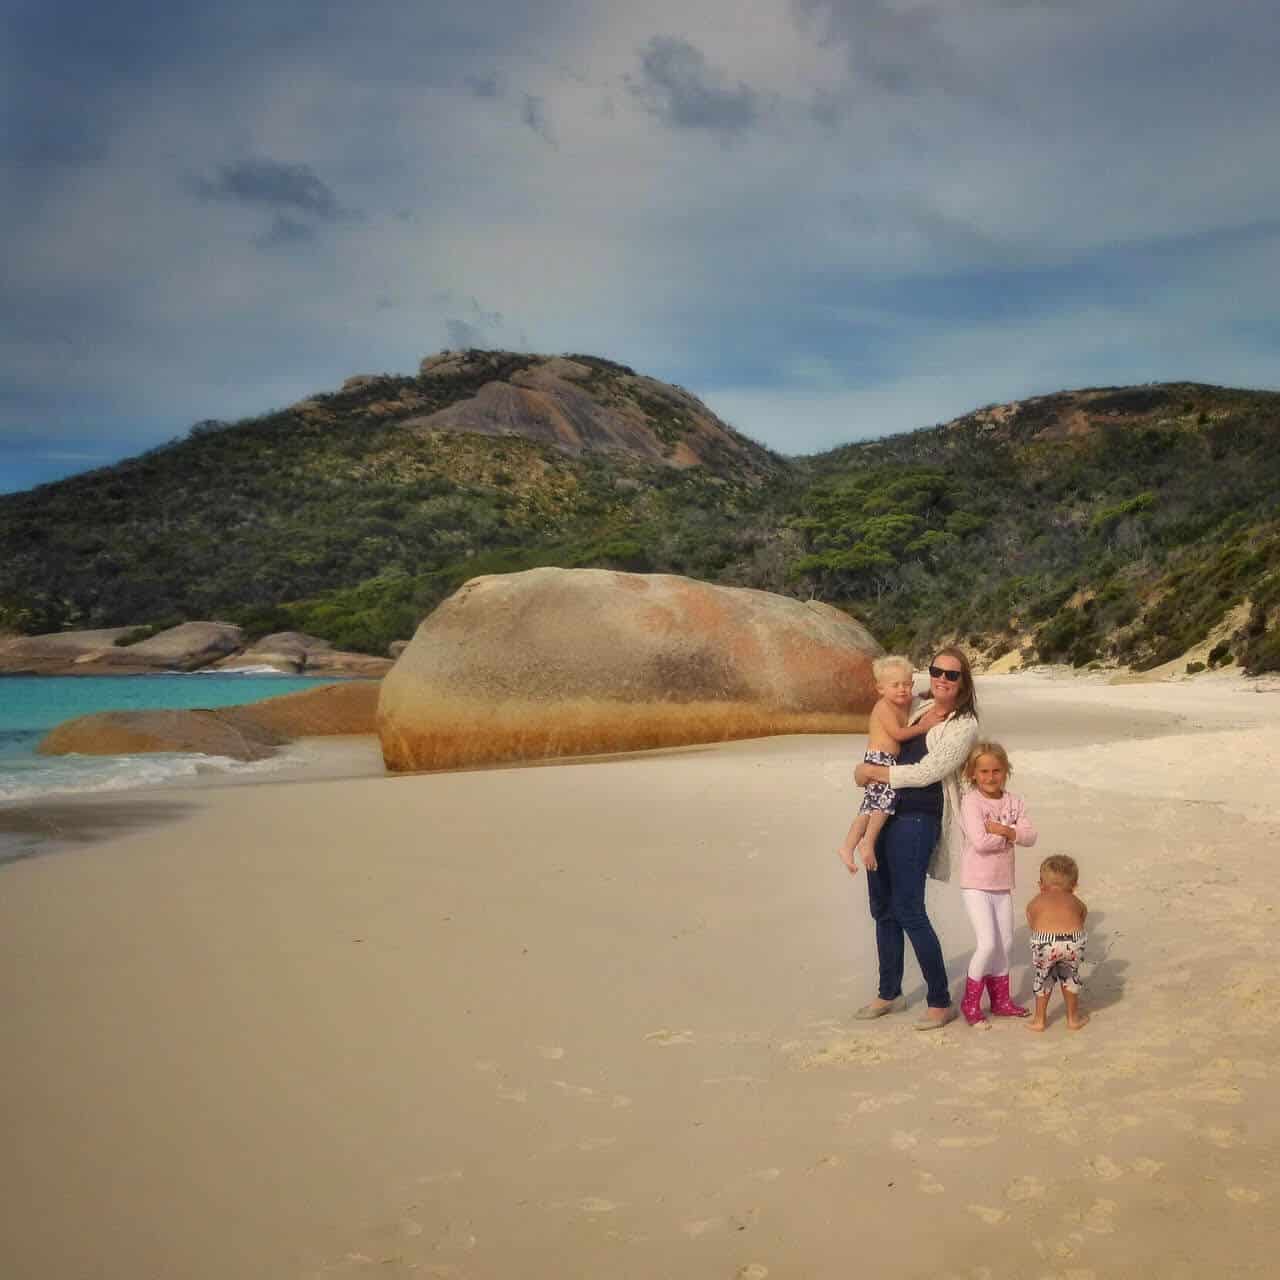 Keri from Our Globetrotters on a beach with her family